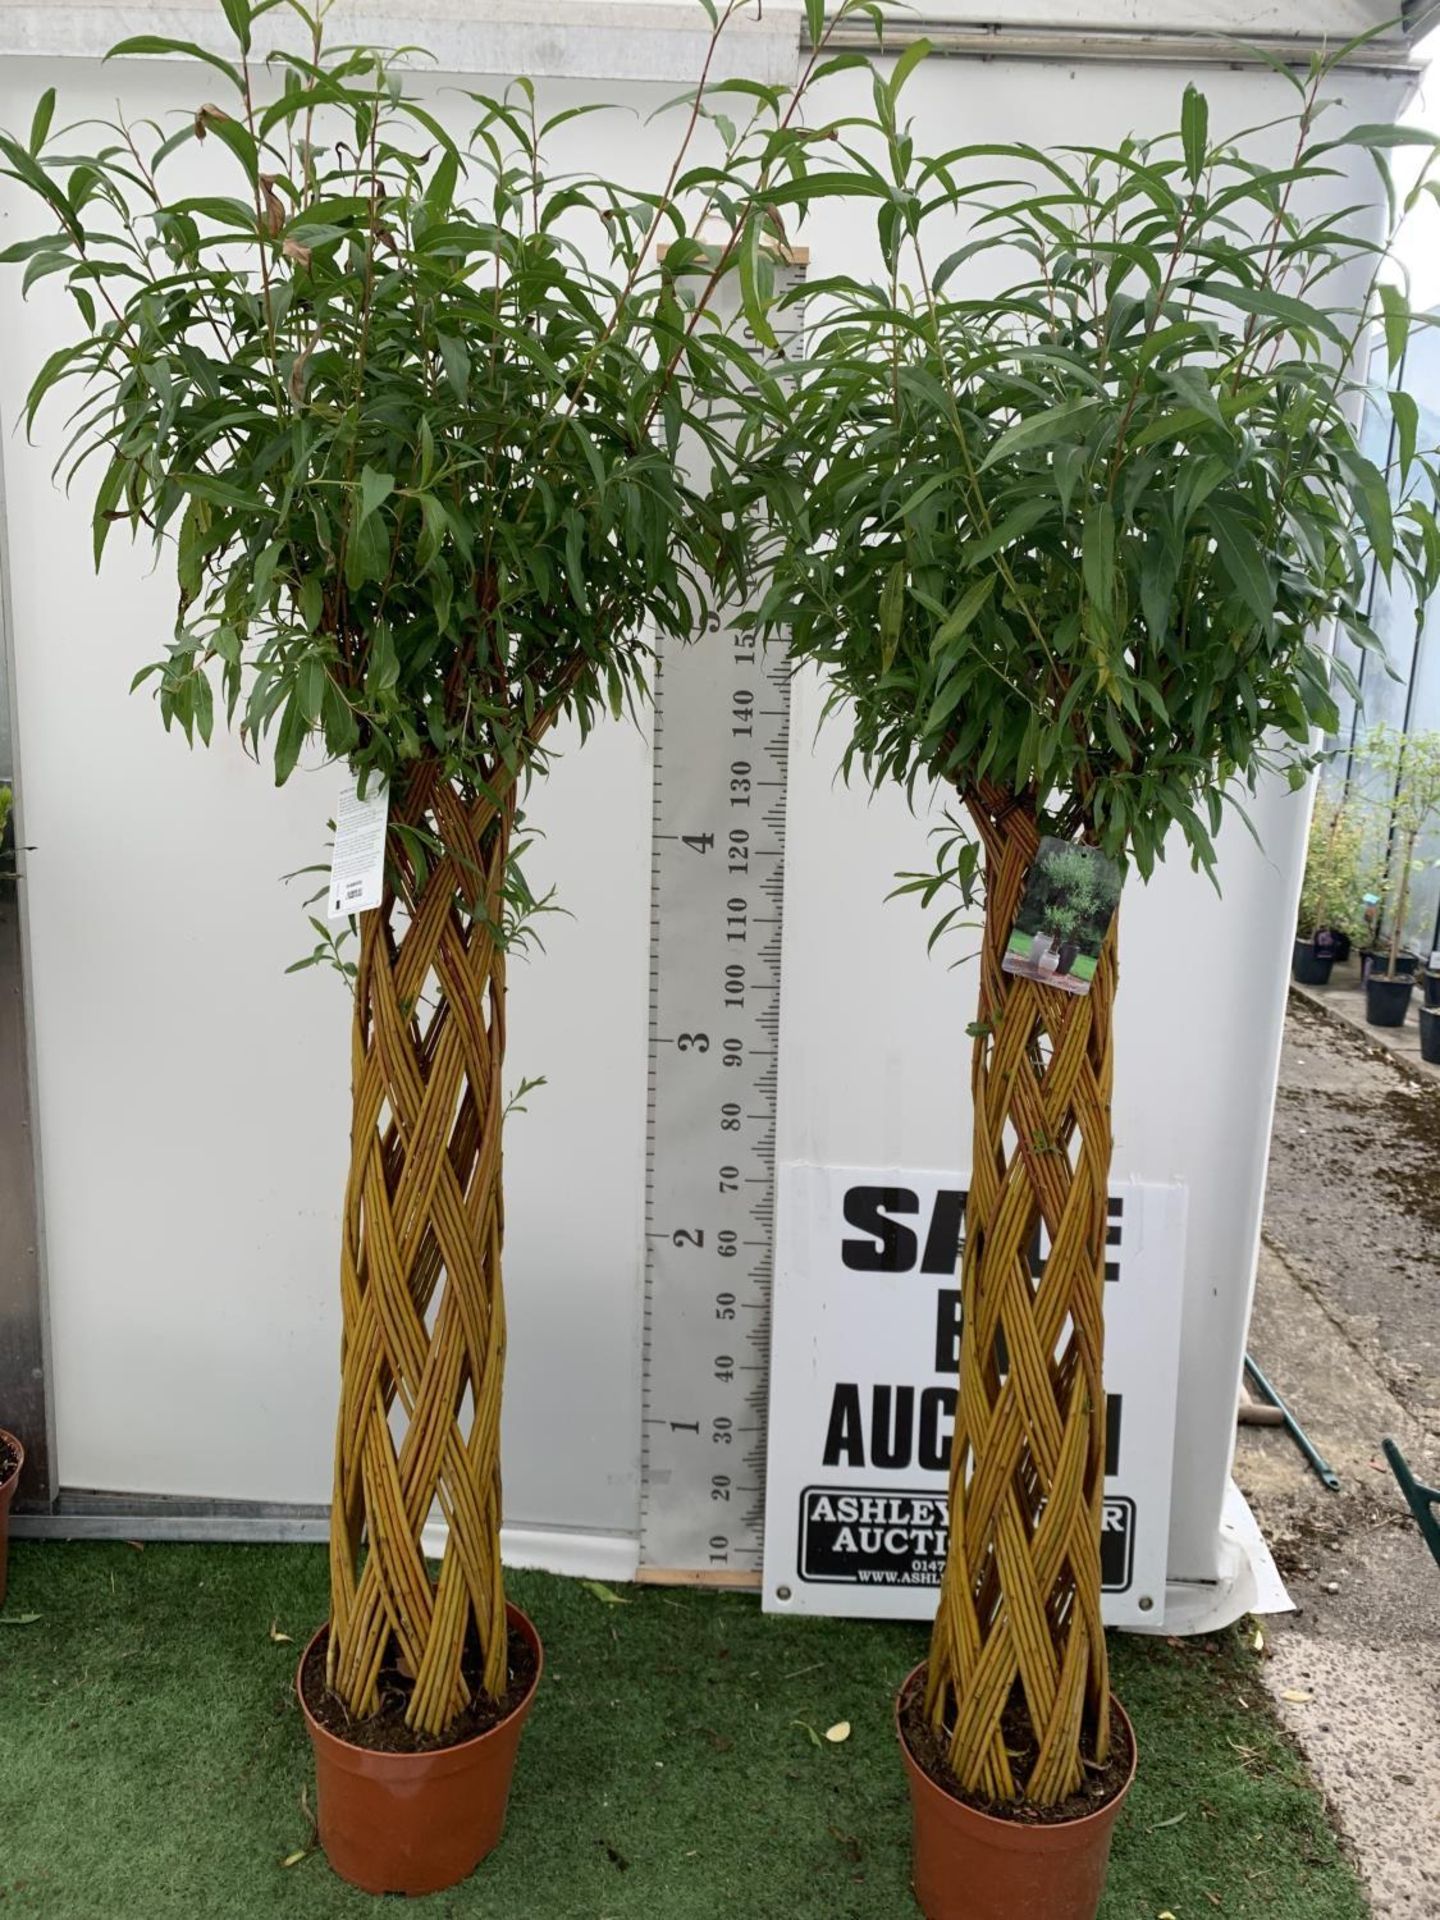 TWO SALIX LIVING WILLOW TREES IN 7.5 LTR POTS OVER 2 METRES IN HEIGHT TO BE SOLD FOR THE TWO PLUS - Image 2 of 22